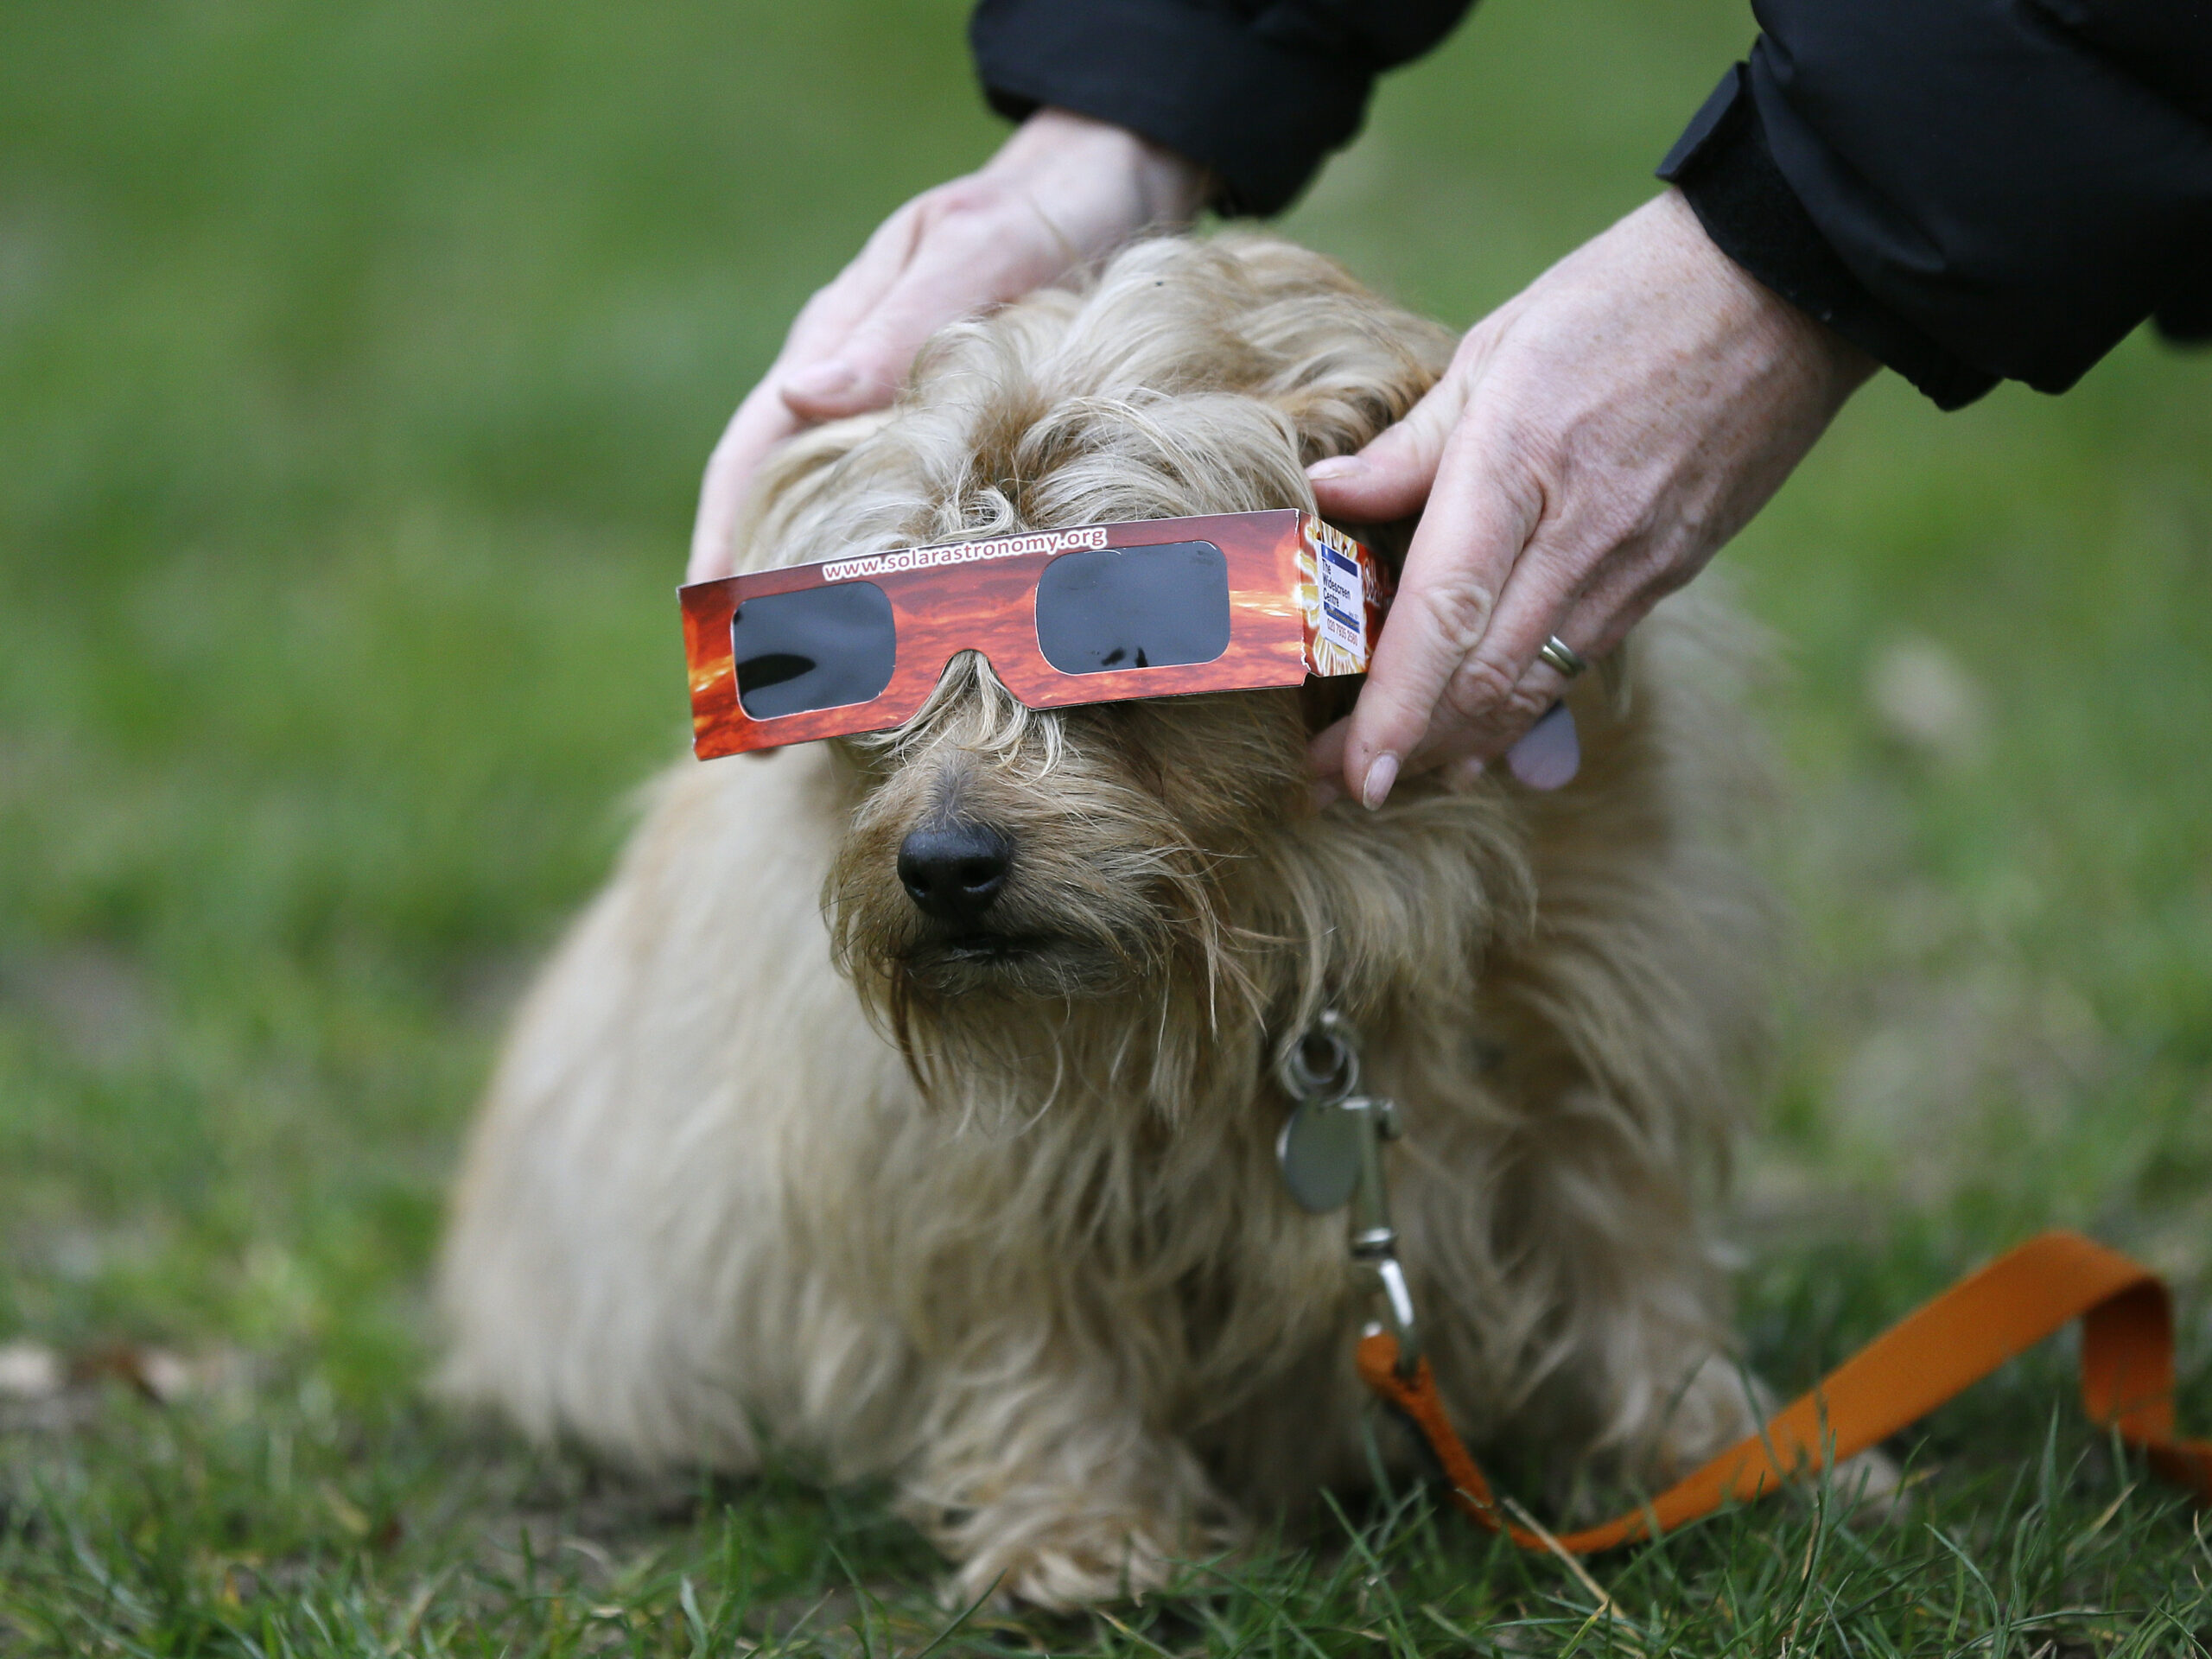 How to keep pets safe during the solar eclipse, whether at home or on the road